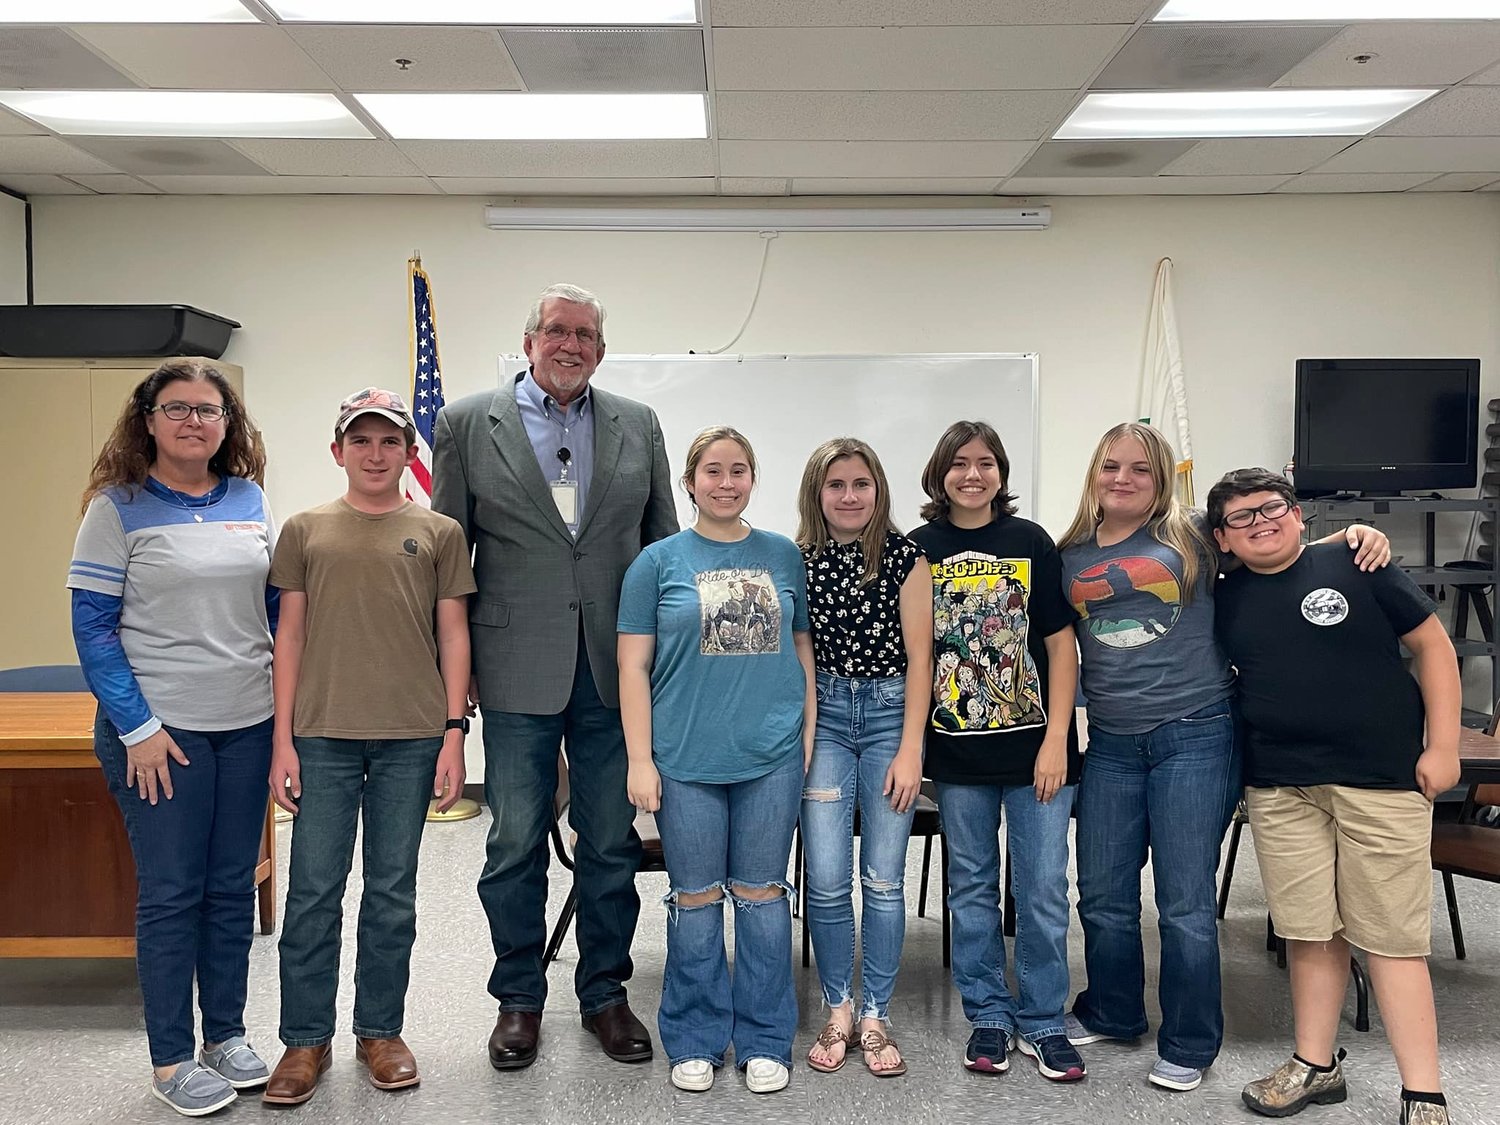 Members of the Okeechobee County Council / Junior Leaders 4-H Club enjoyed their  meeting with Judge Jerald Bryant.

Judge Bryant discussed his role as Clerk of the Court for Okeechobee County and the responsibilities of his office. Club members learned about Constitutional Officers, the services offered by the Clerk of the Court, and the importance of serving on a jury for their community.